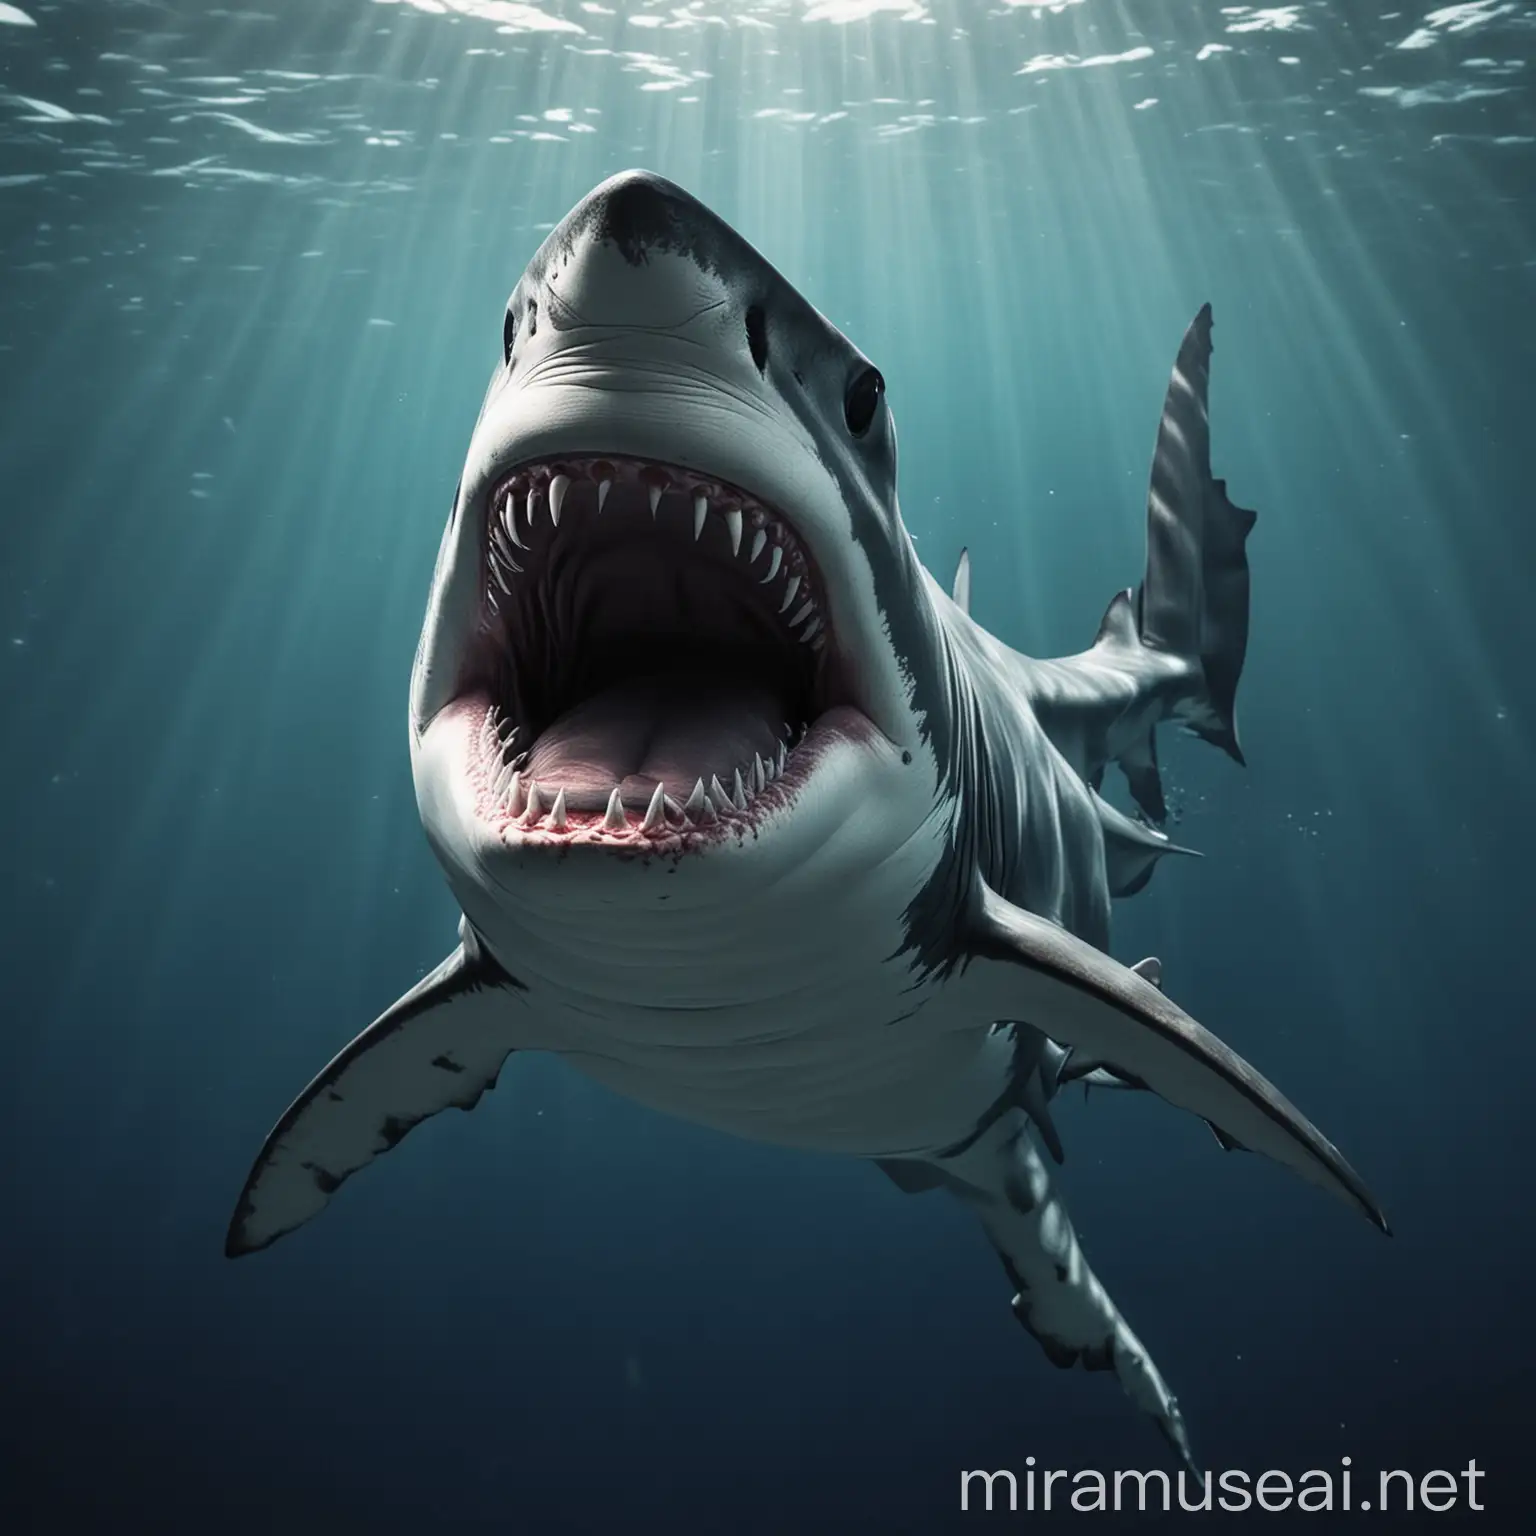 i want only this picture background, please remove just shark only and please make picture into the 1280 × 720 pixels for the youtube thumbnail 
